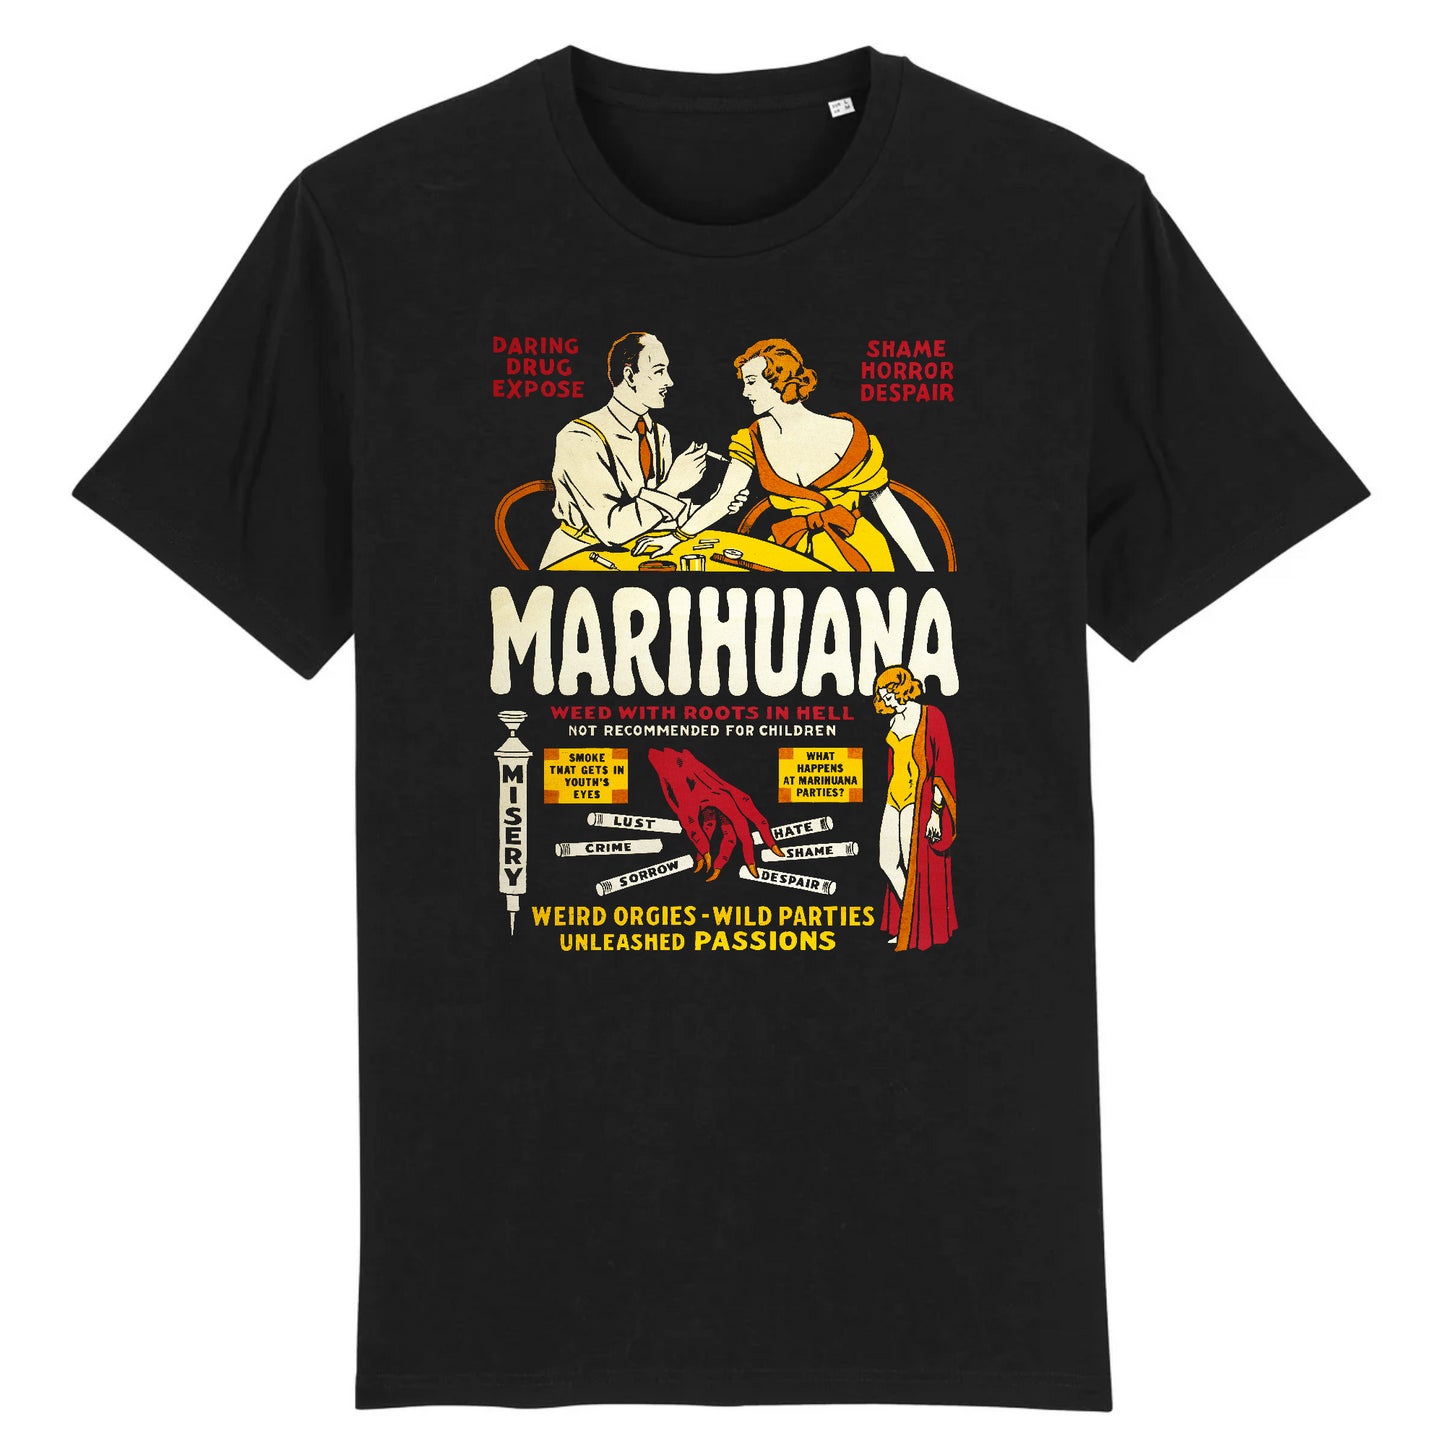 Marihuana, Weed With Roots In Hell Roadshow Attractions, 1935 - Organic Cotton T-Shirt